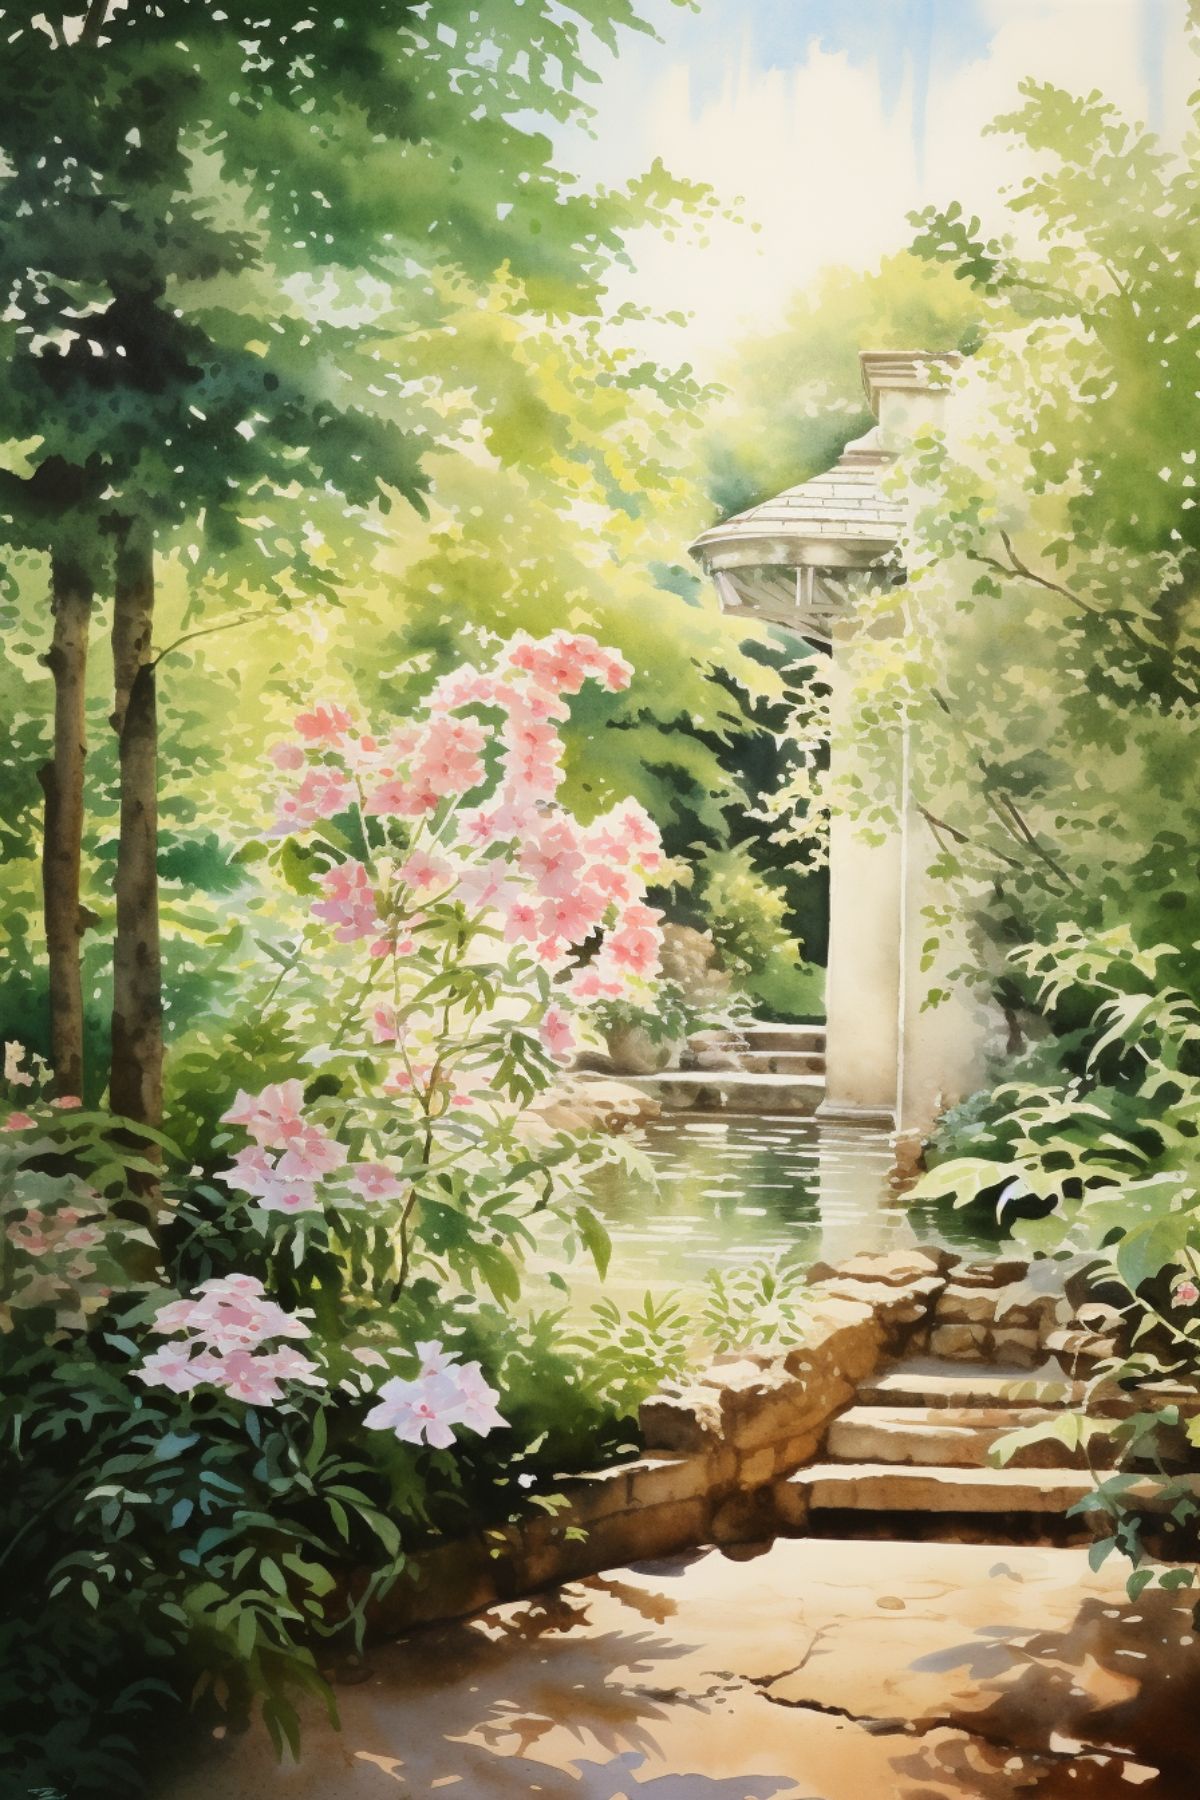 watercolor scene of a beautiful home in the woods with flowers and trees